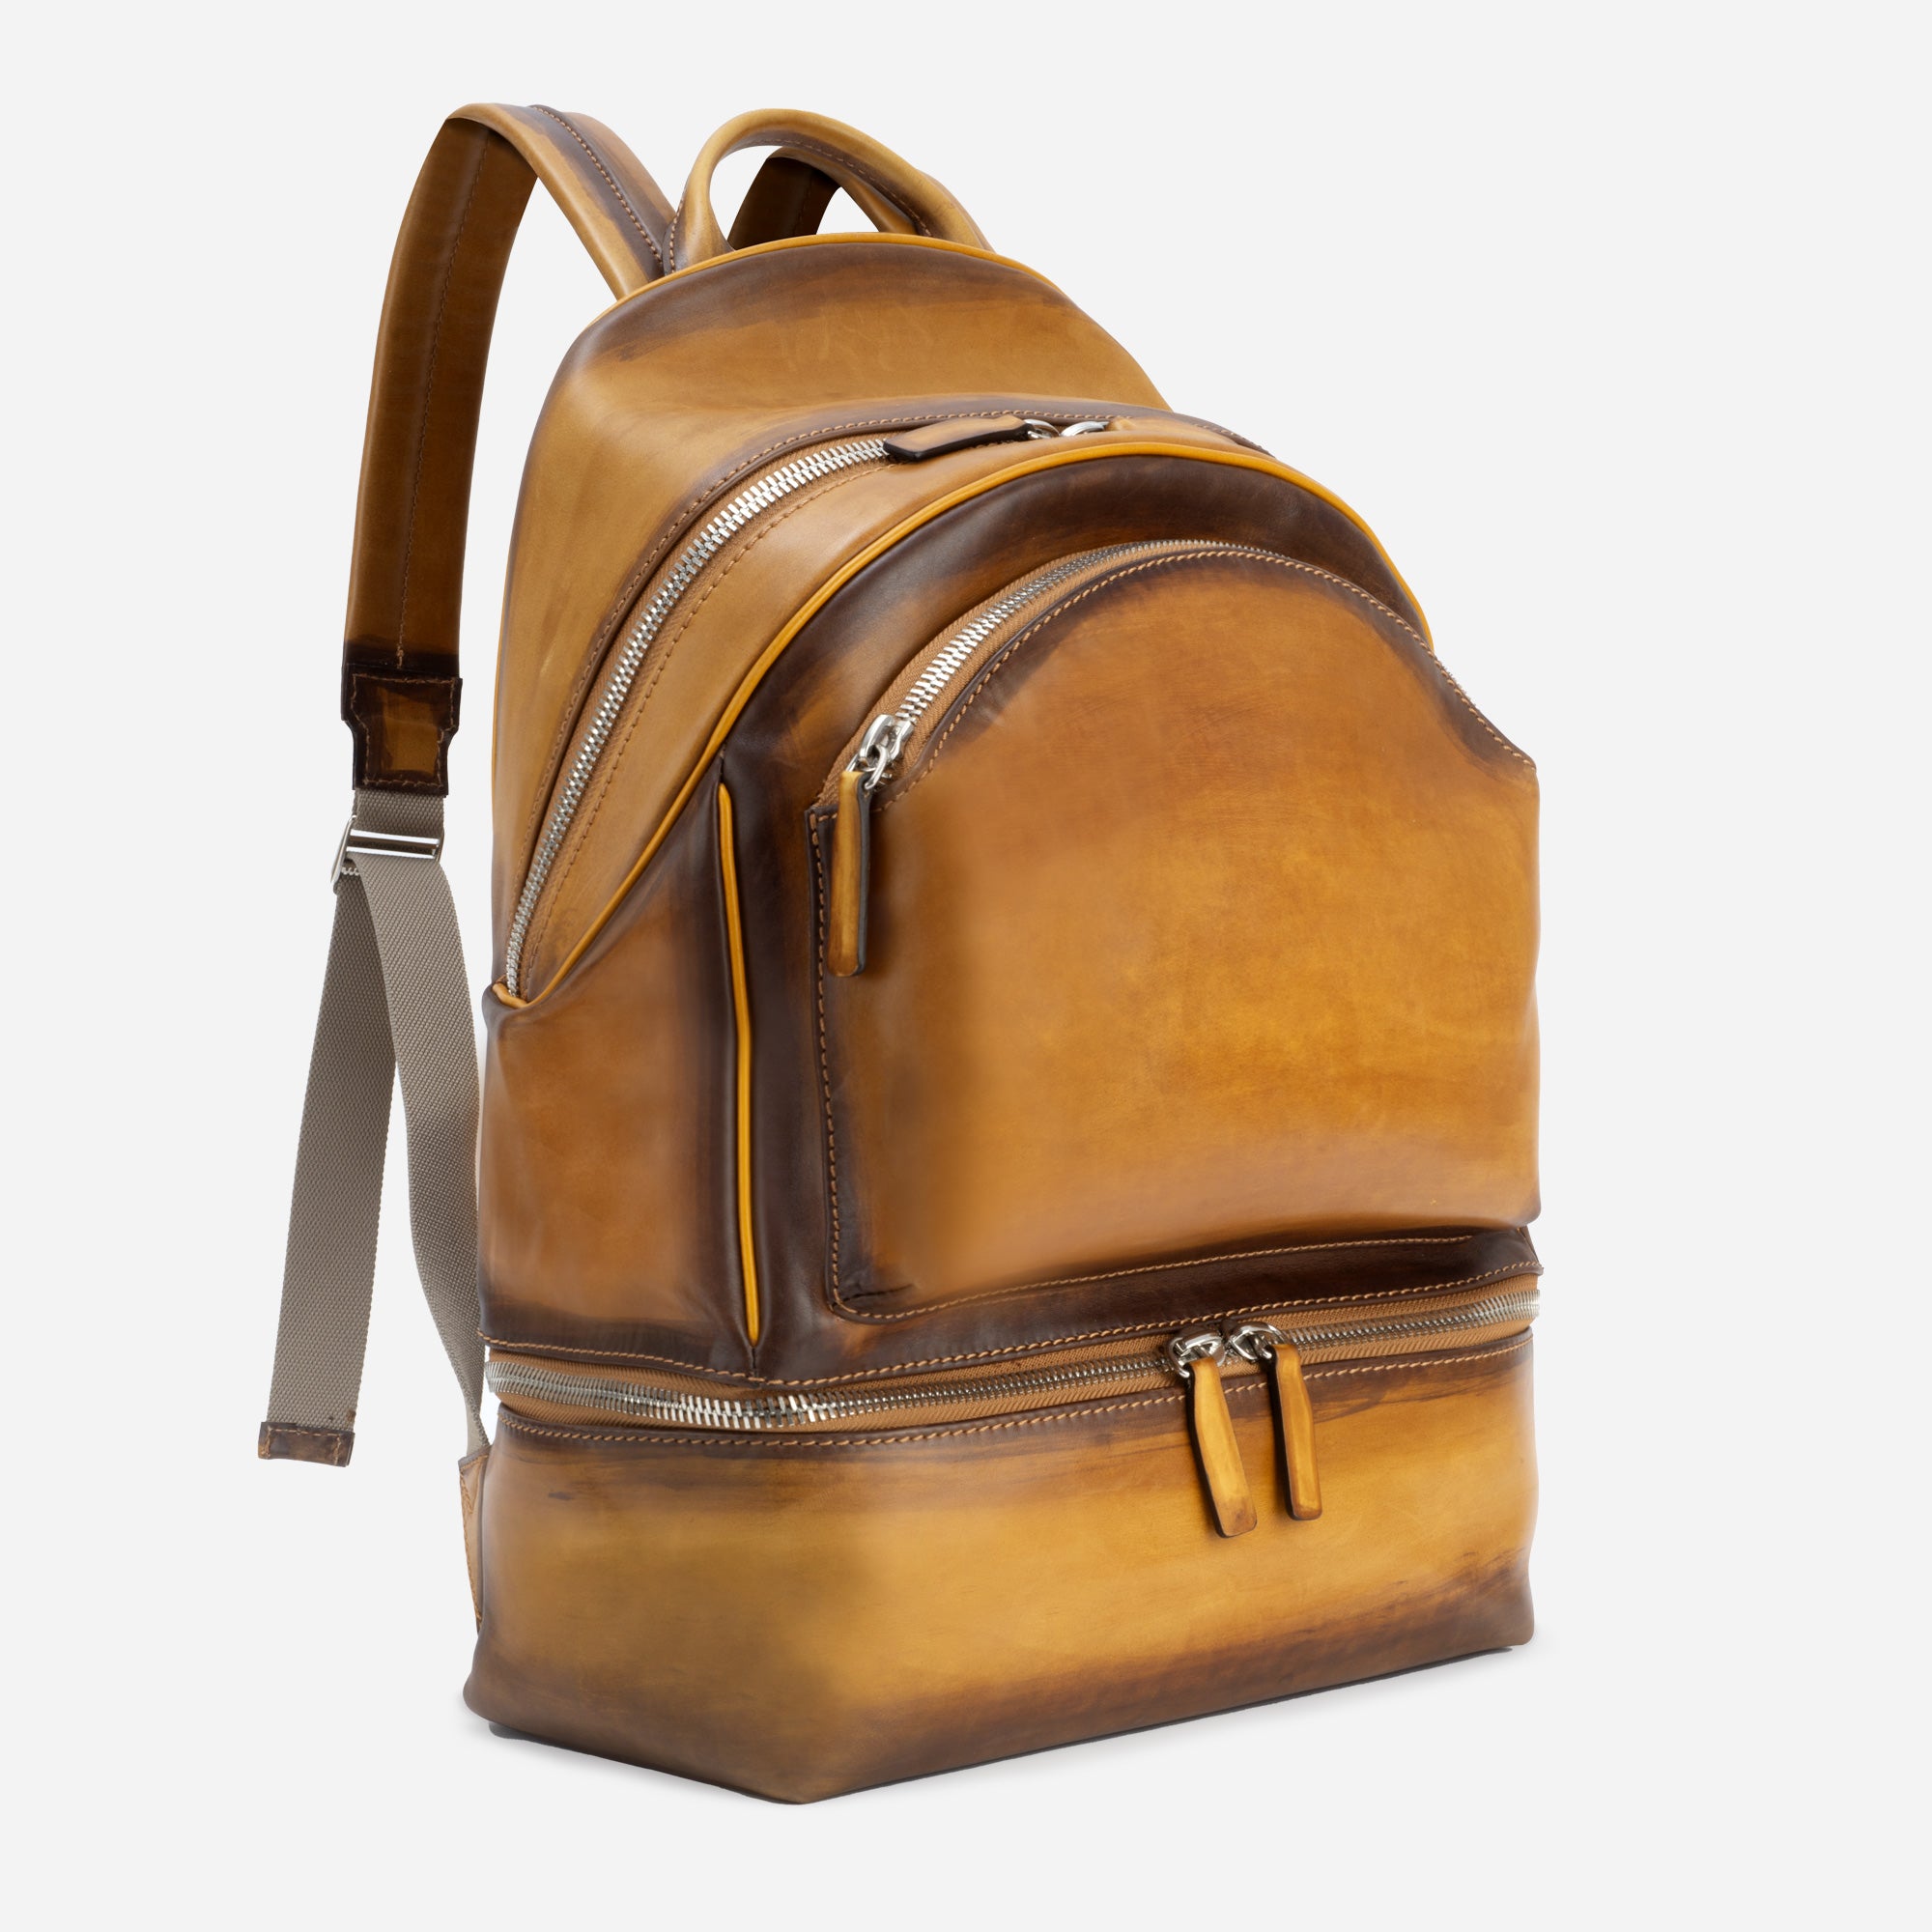 830 S - Backpack<br> Hand painted calfskin leather